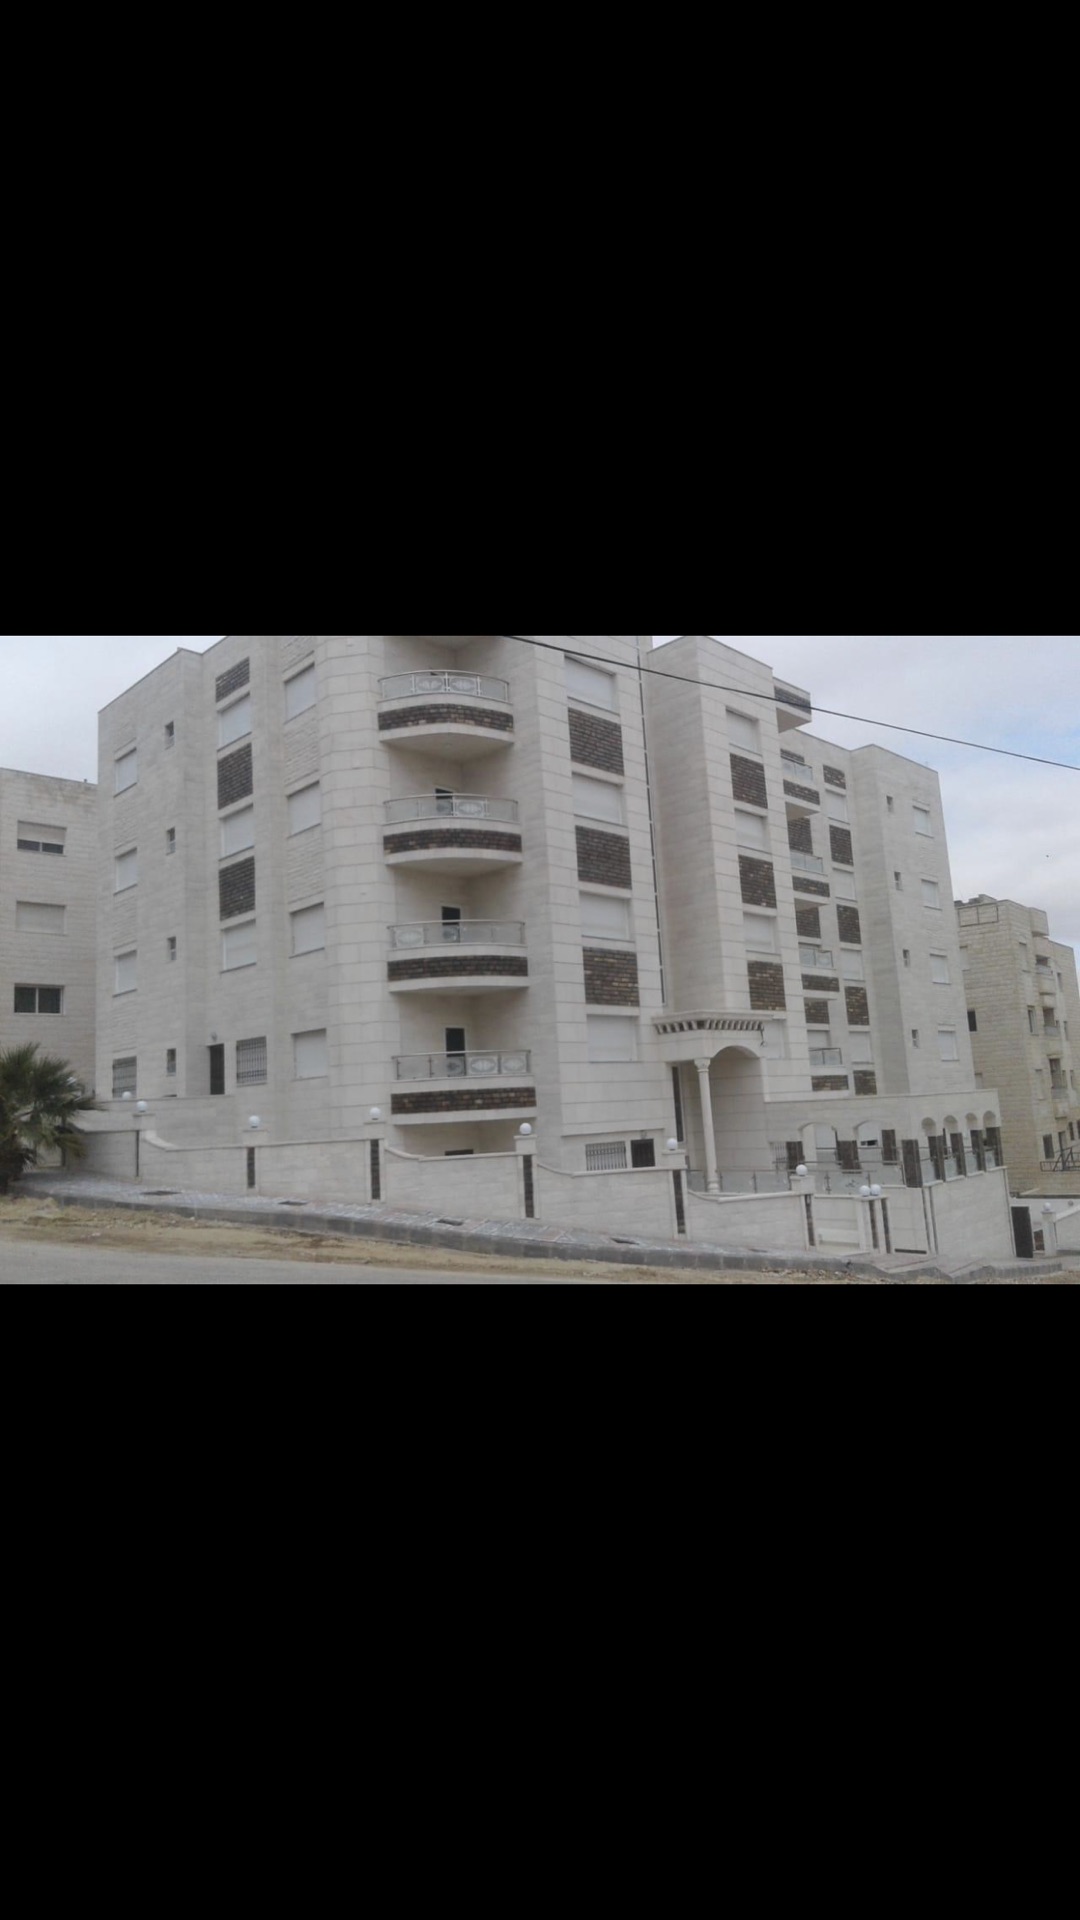 Apartments for rent in Ajman furnished, furnished, and very elegant at a very attractive price-  شقق فارغة فخمة جدا...